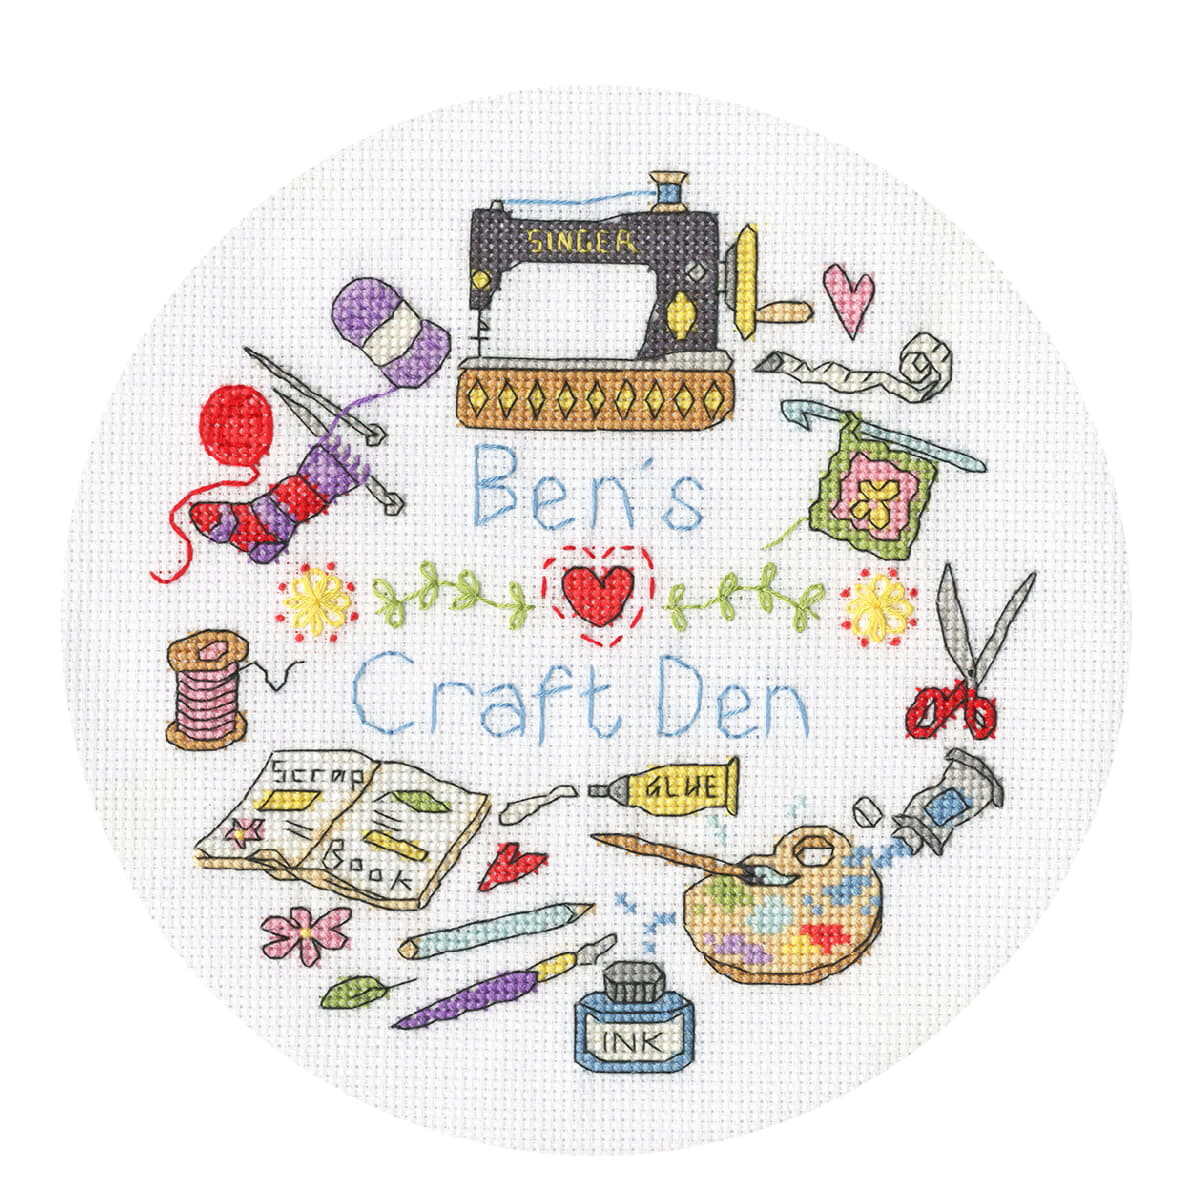 A circular picture decorated with cross stitches and...